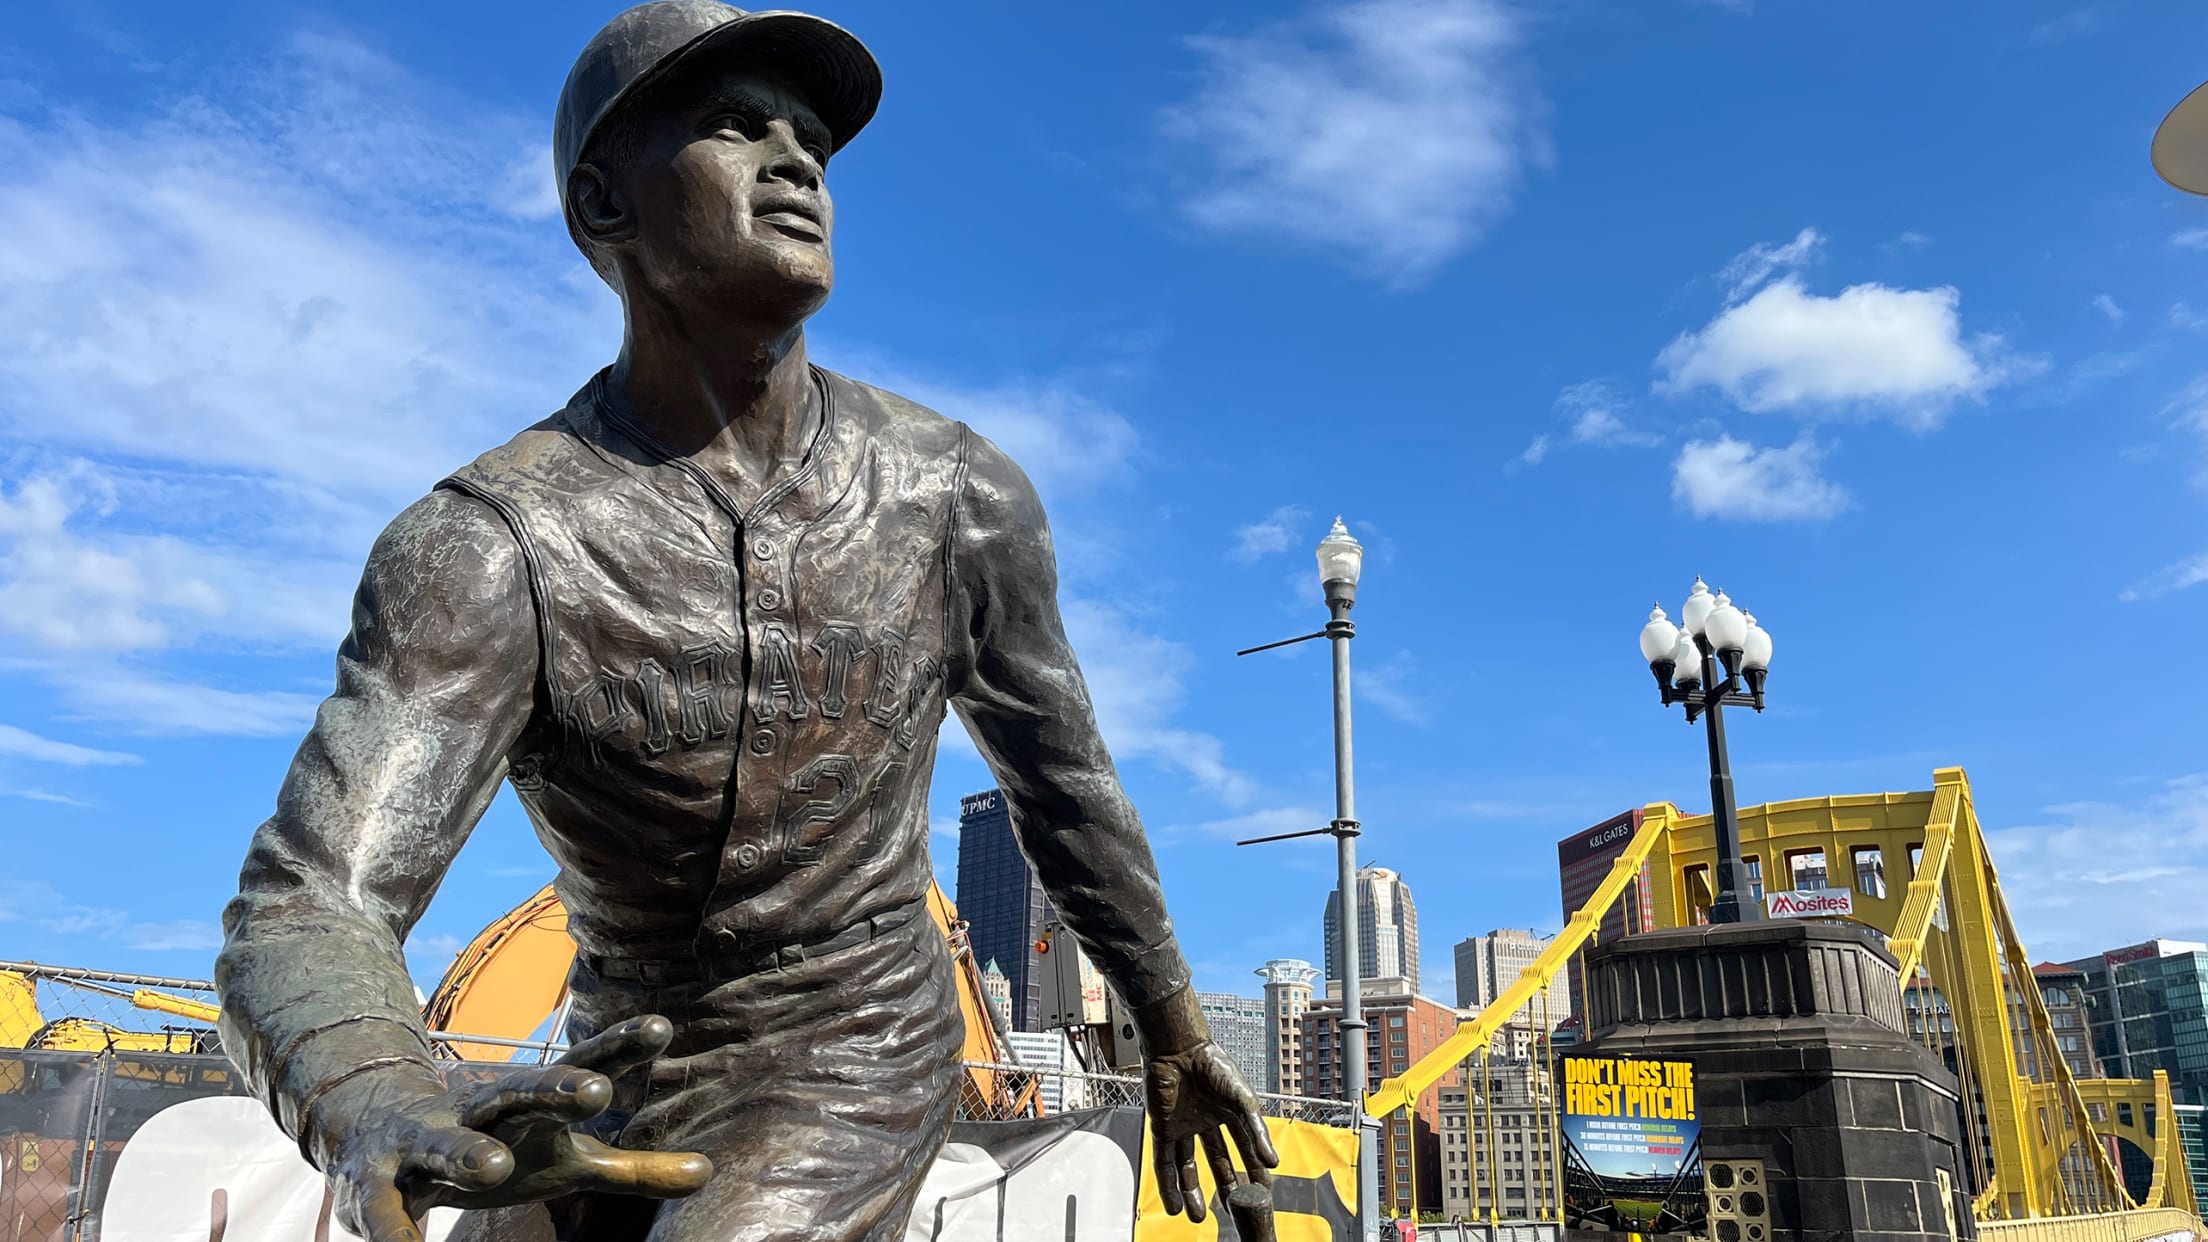 Pittsburgh Murals and Public Art: Willie Stargell sculpture by Susan Wagner